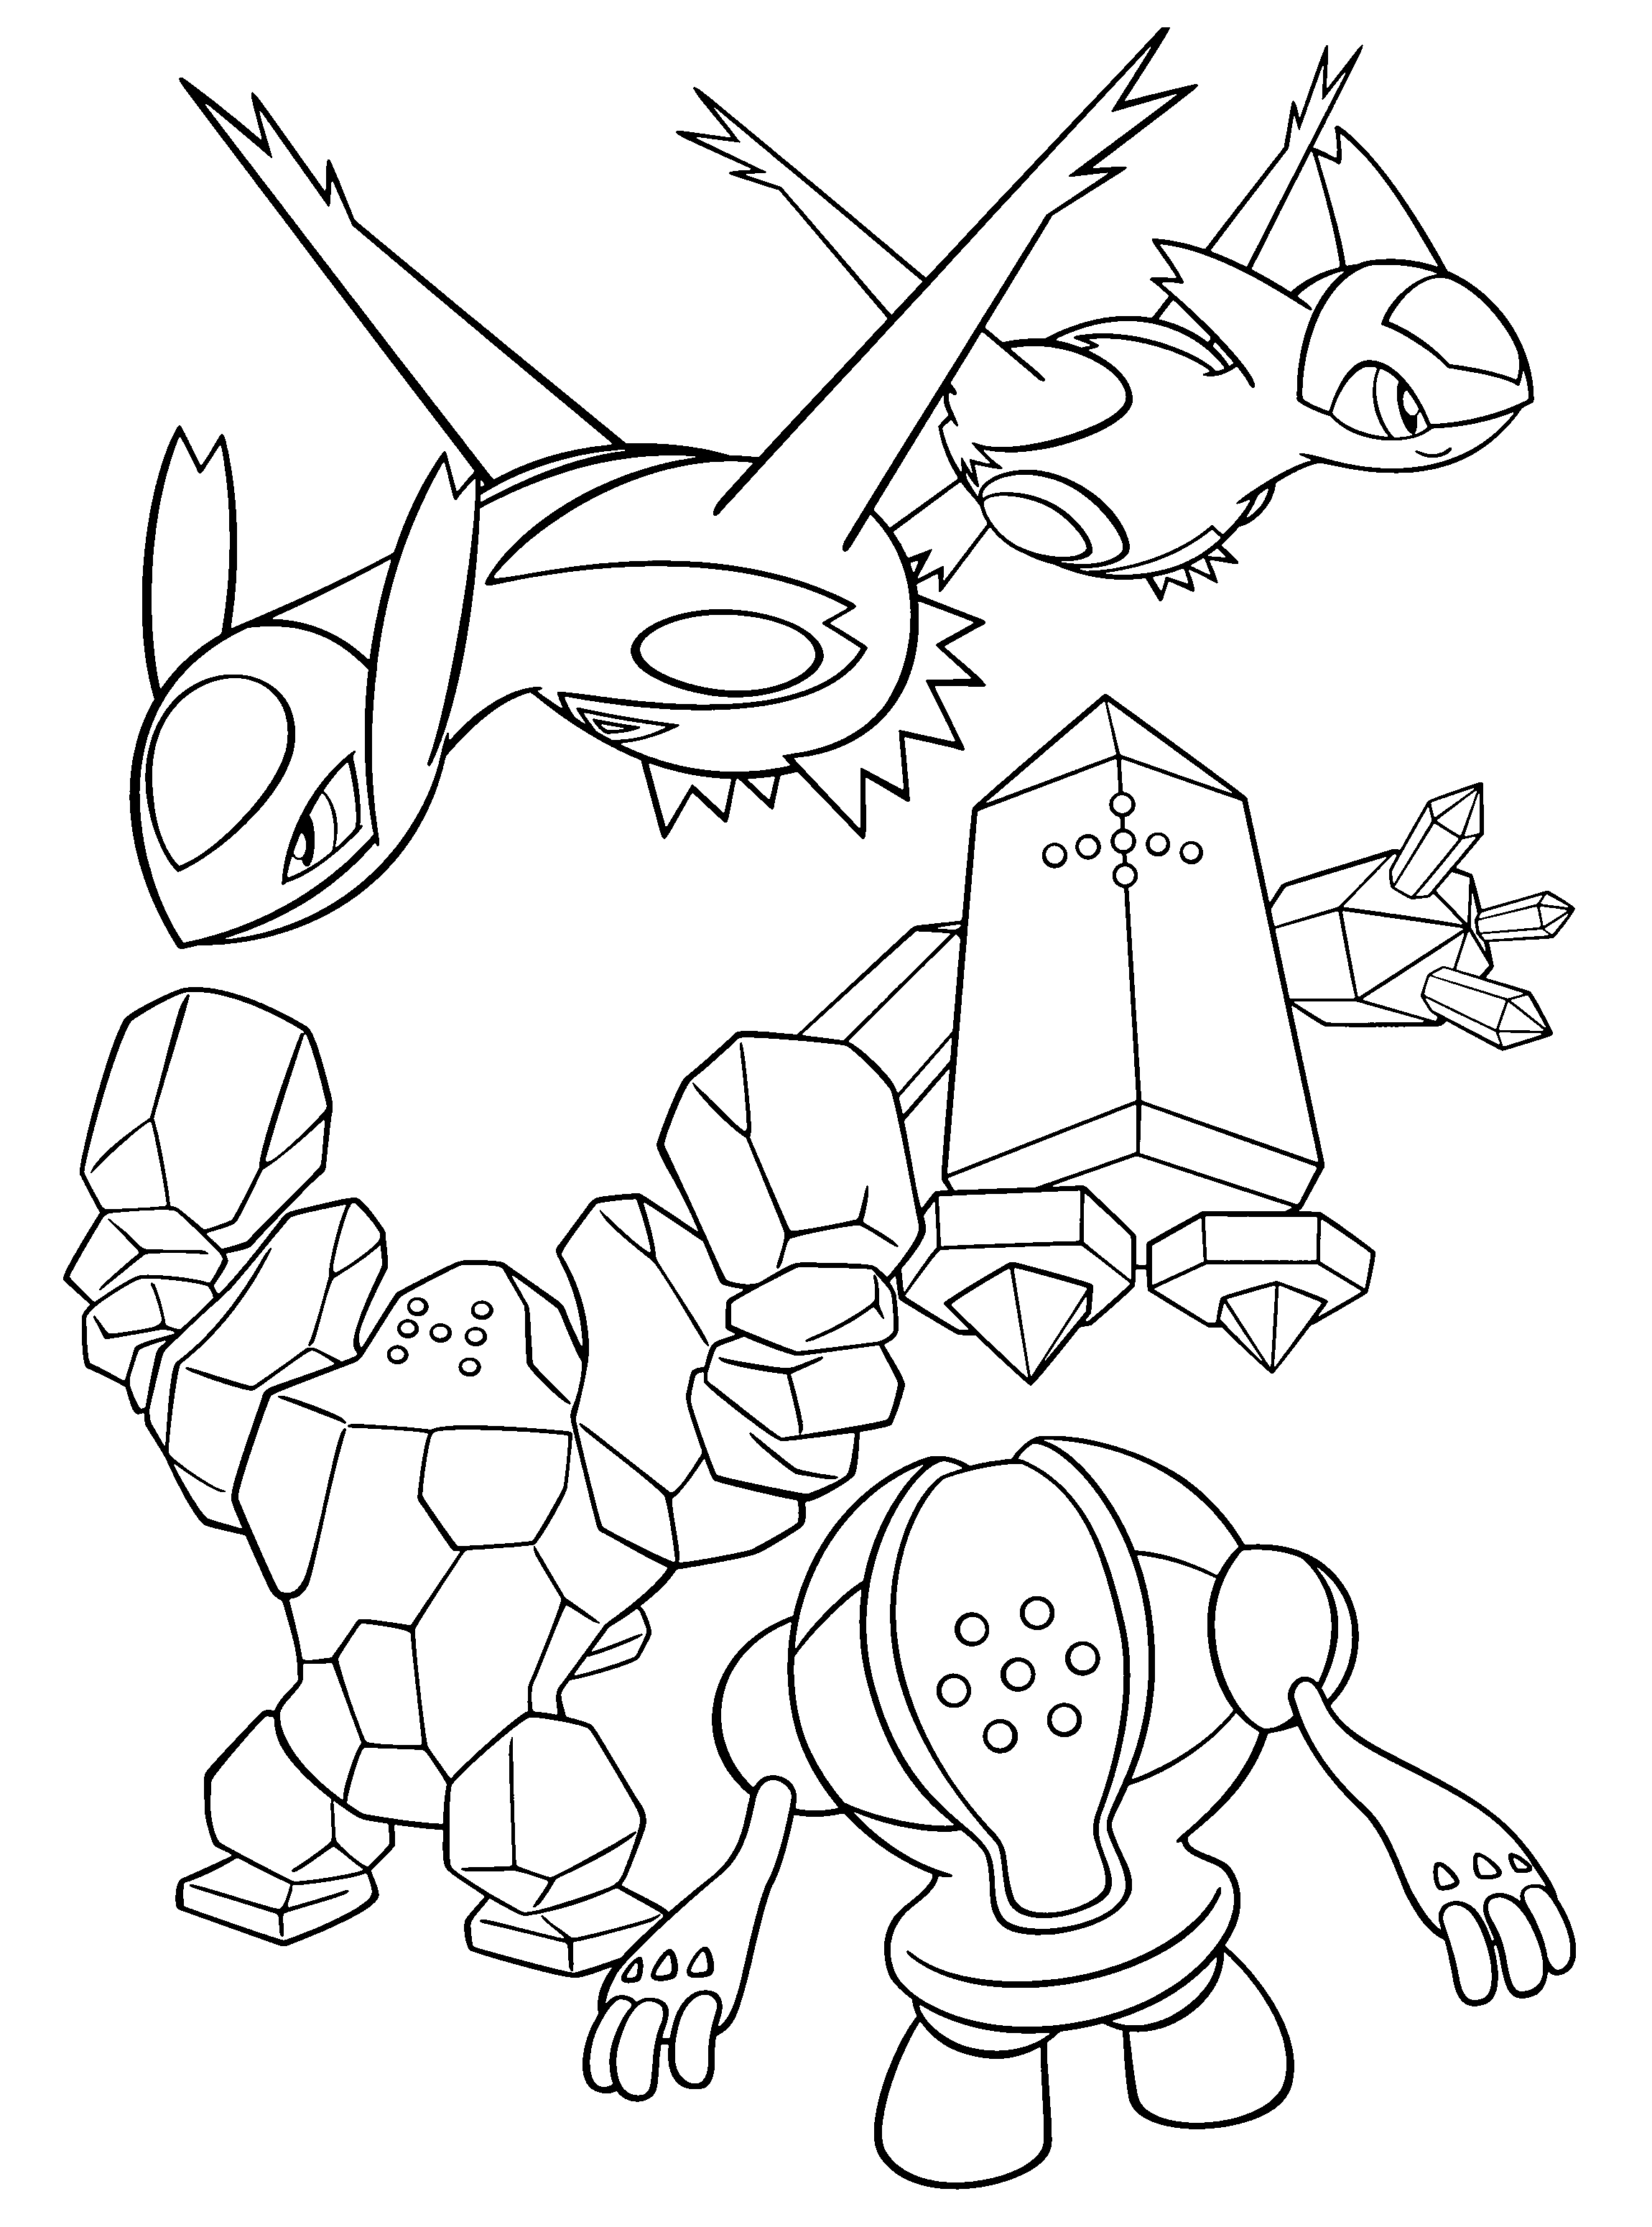 Legendary Pokemon Wallpapers Free Coloring Pages Infoupdate org